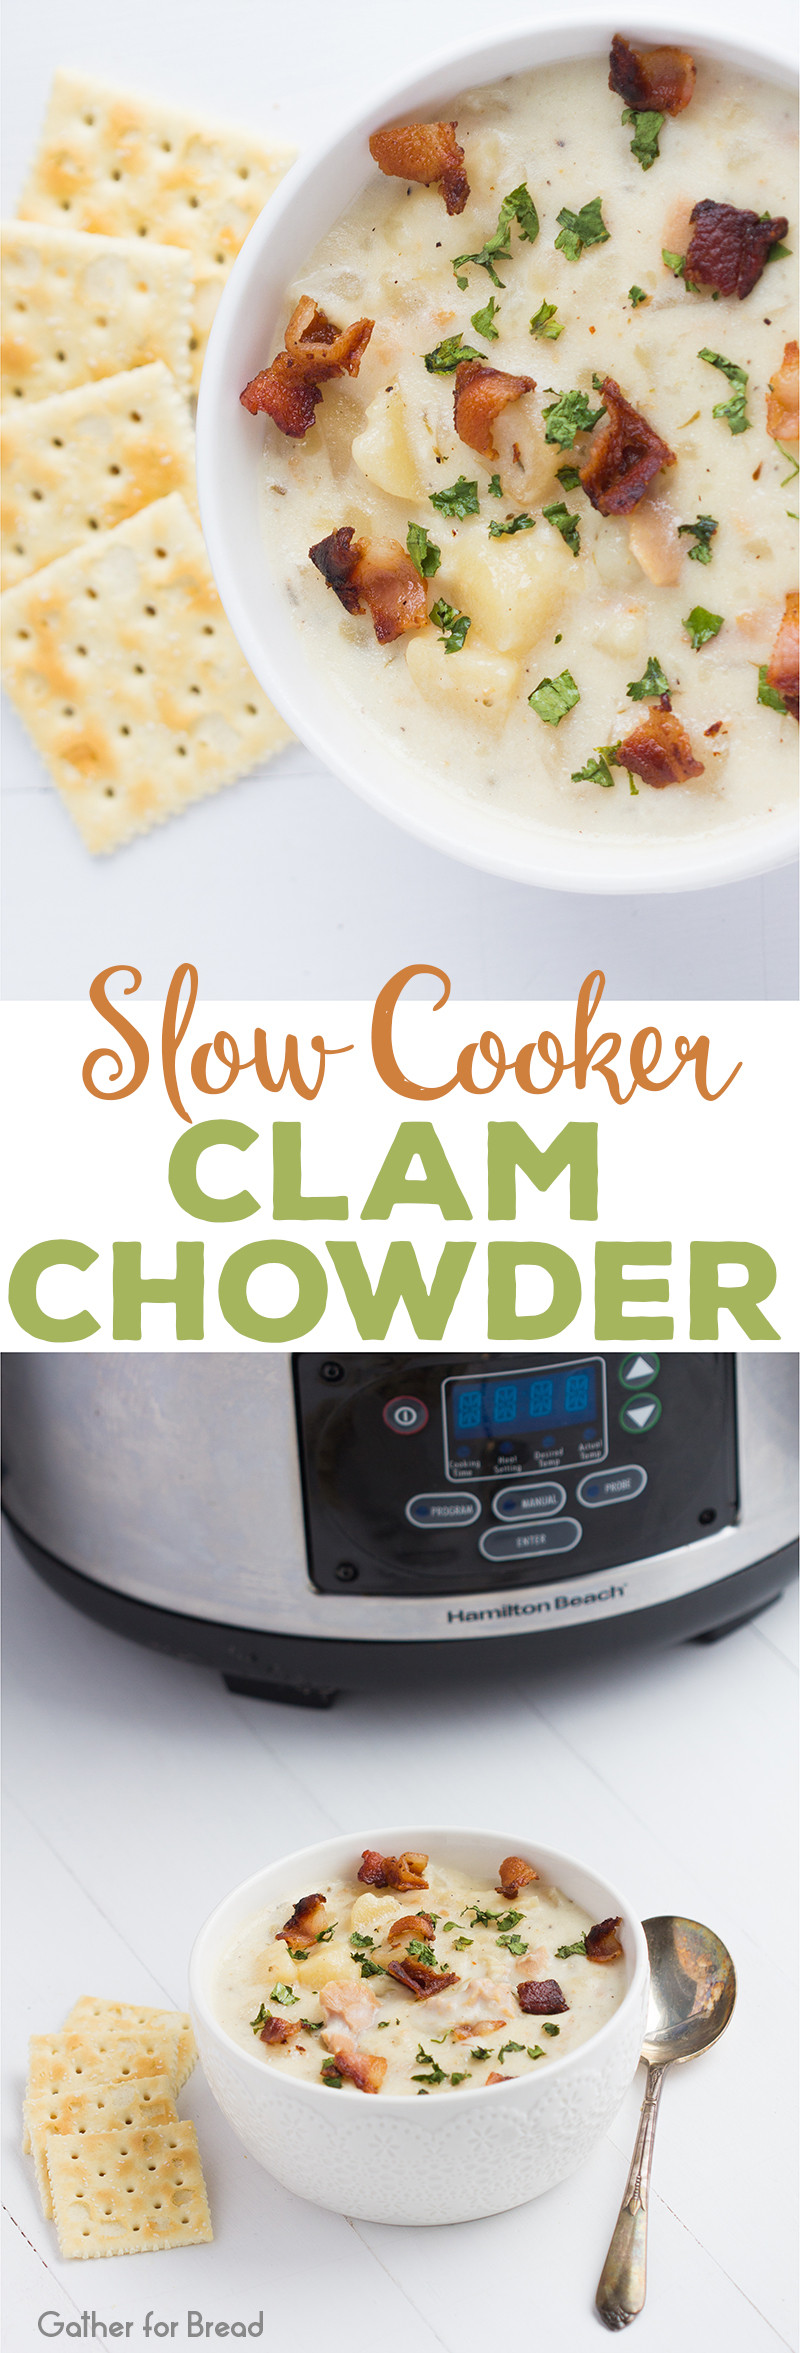 Slow Cooker Clam Chowder
 Slow Cooker Clam Chowder Gather for Bread